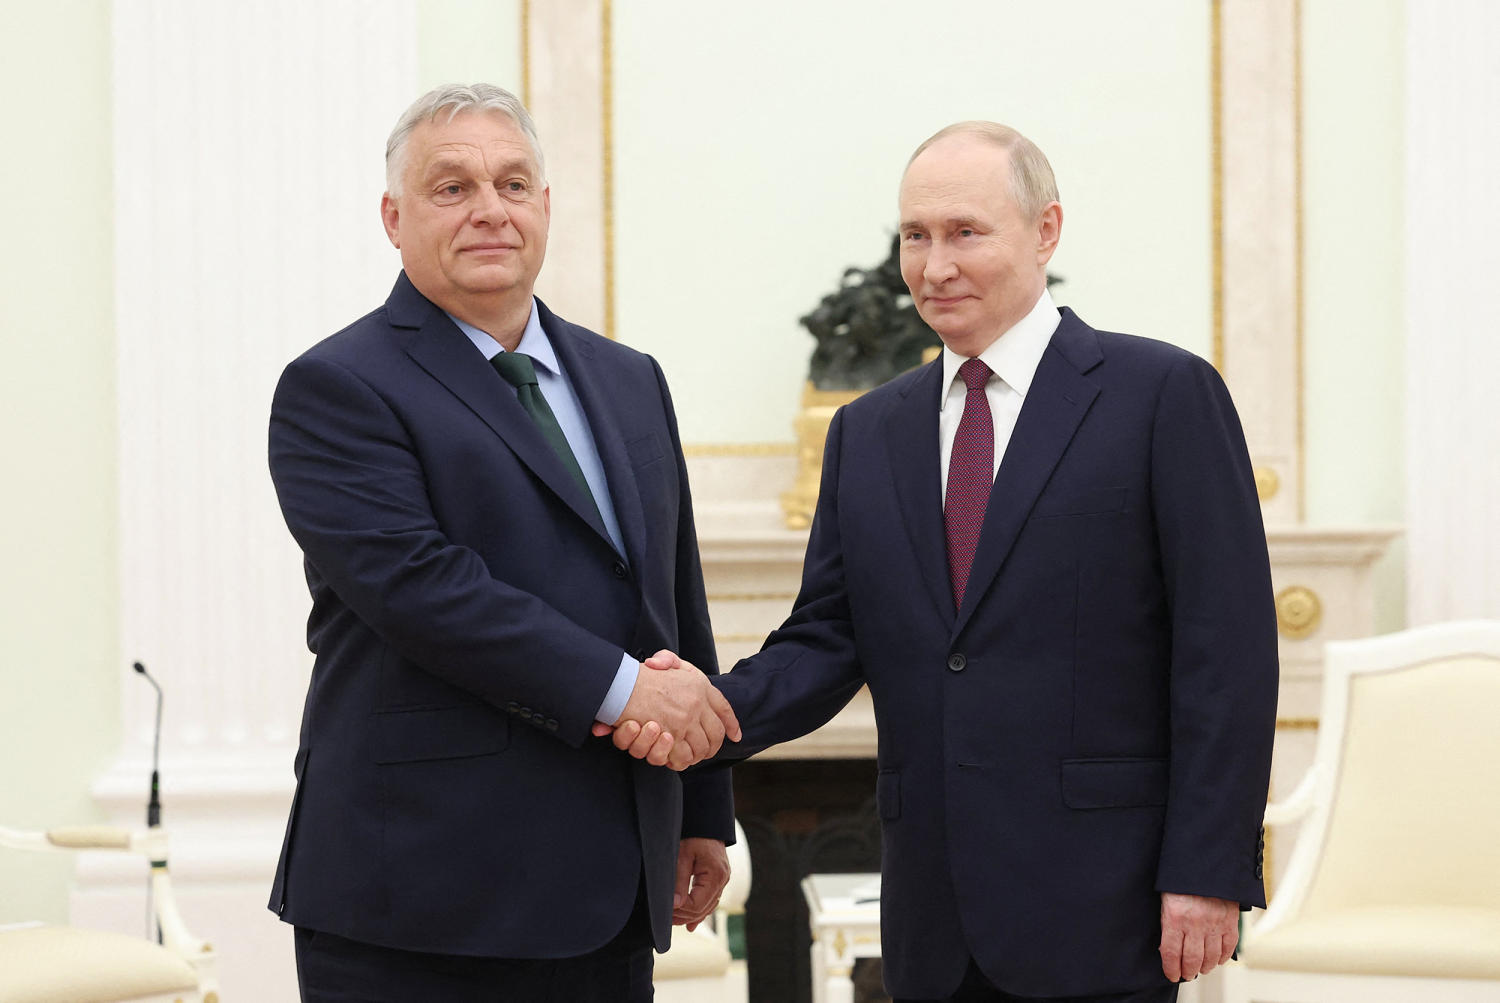 Putin tells Hungary's Orbán he is ready to discuss 'nuances' of Ukraine conflict